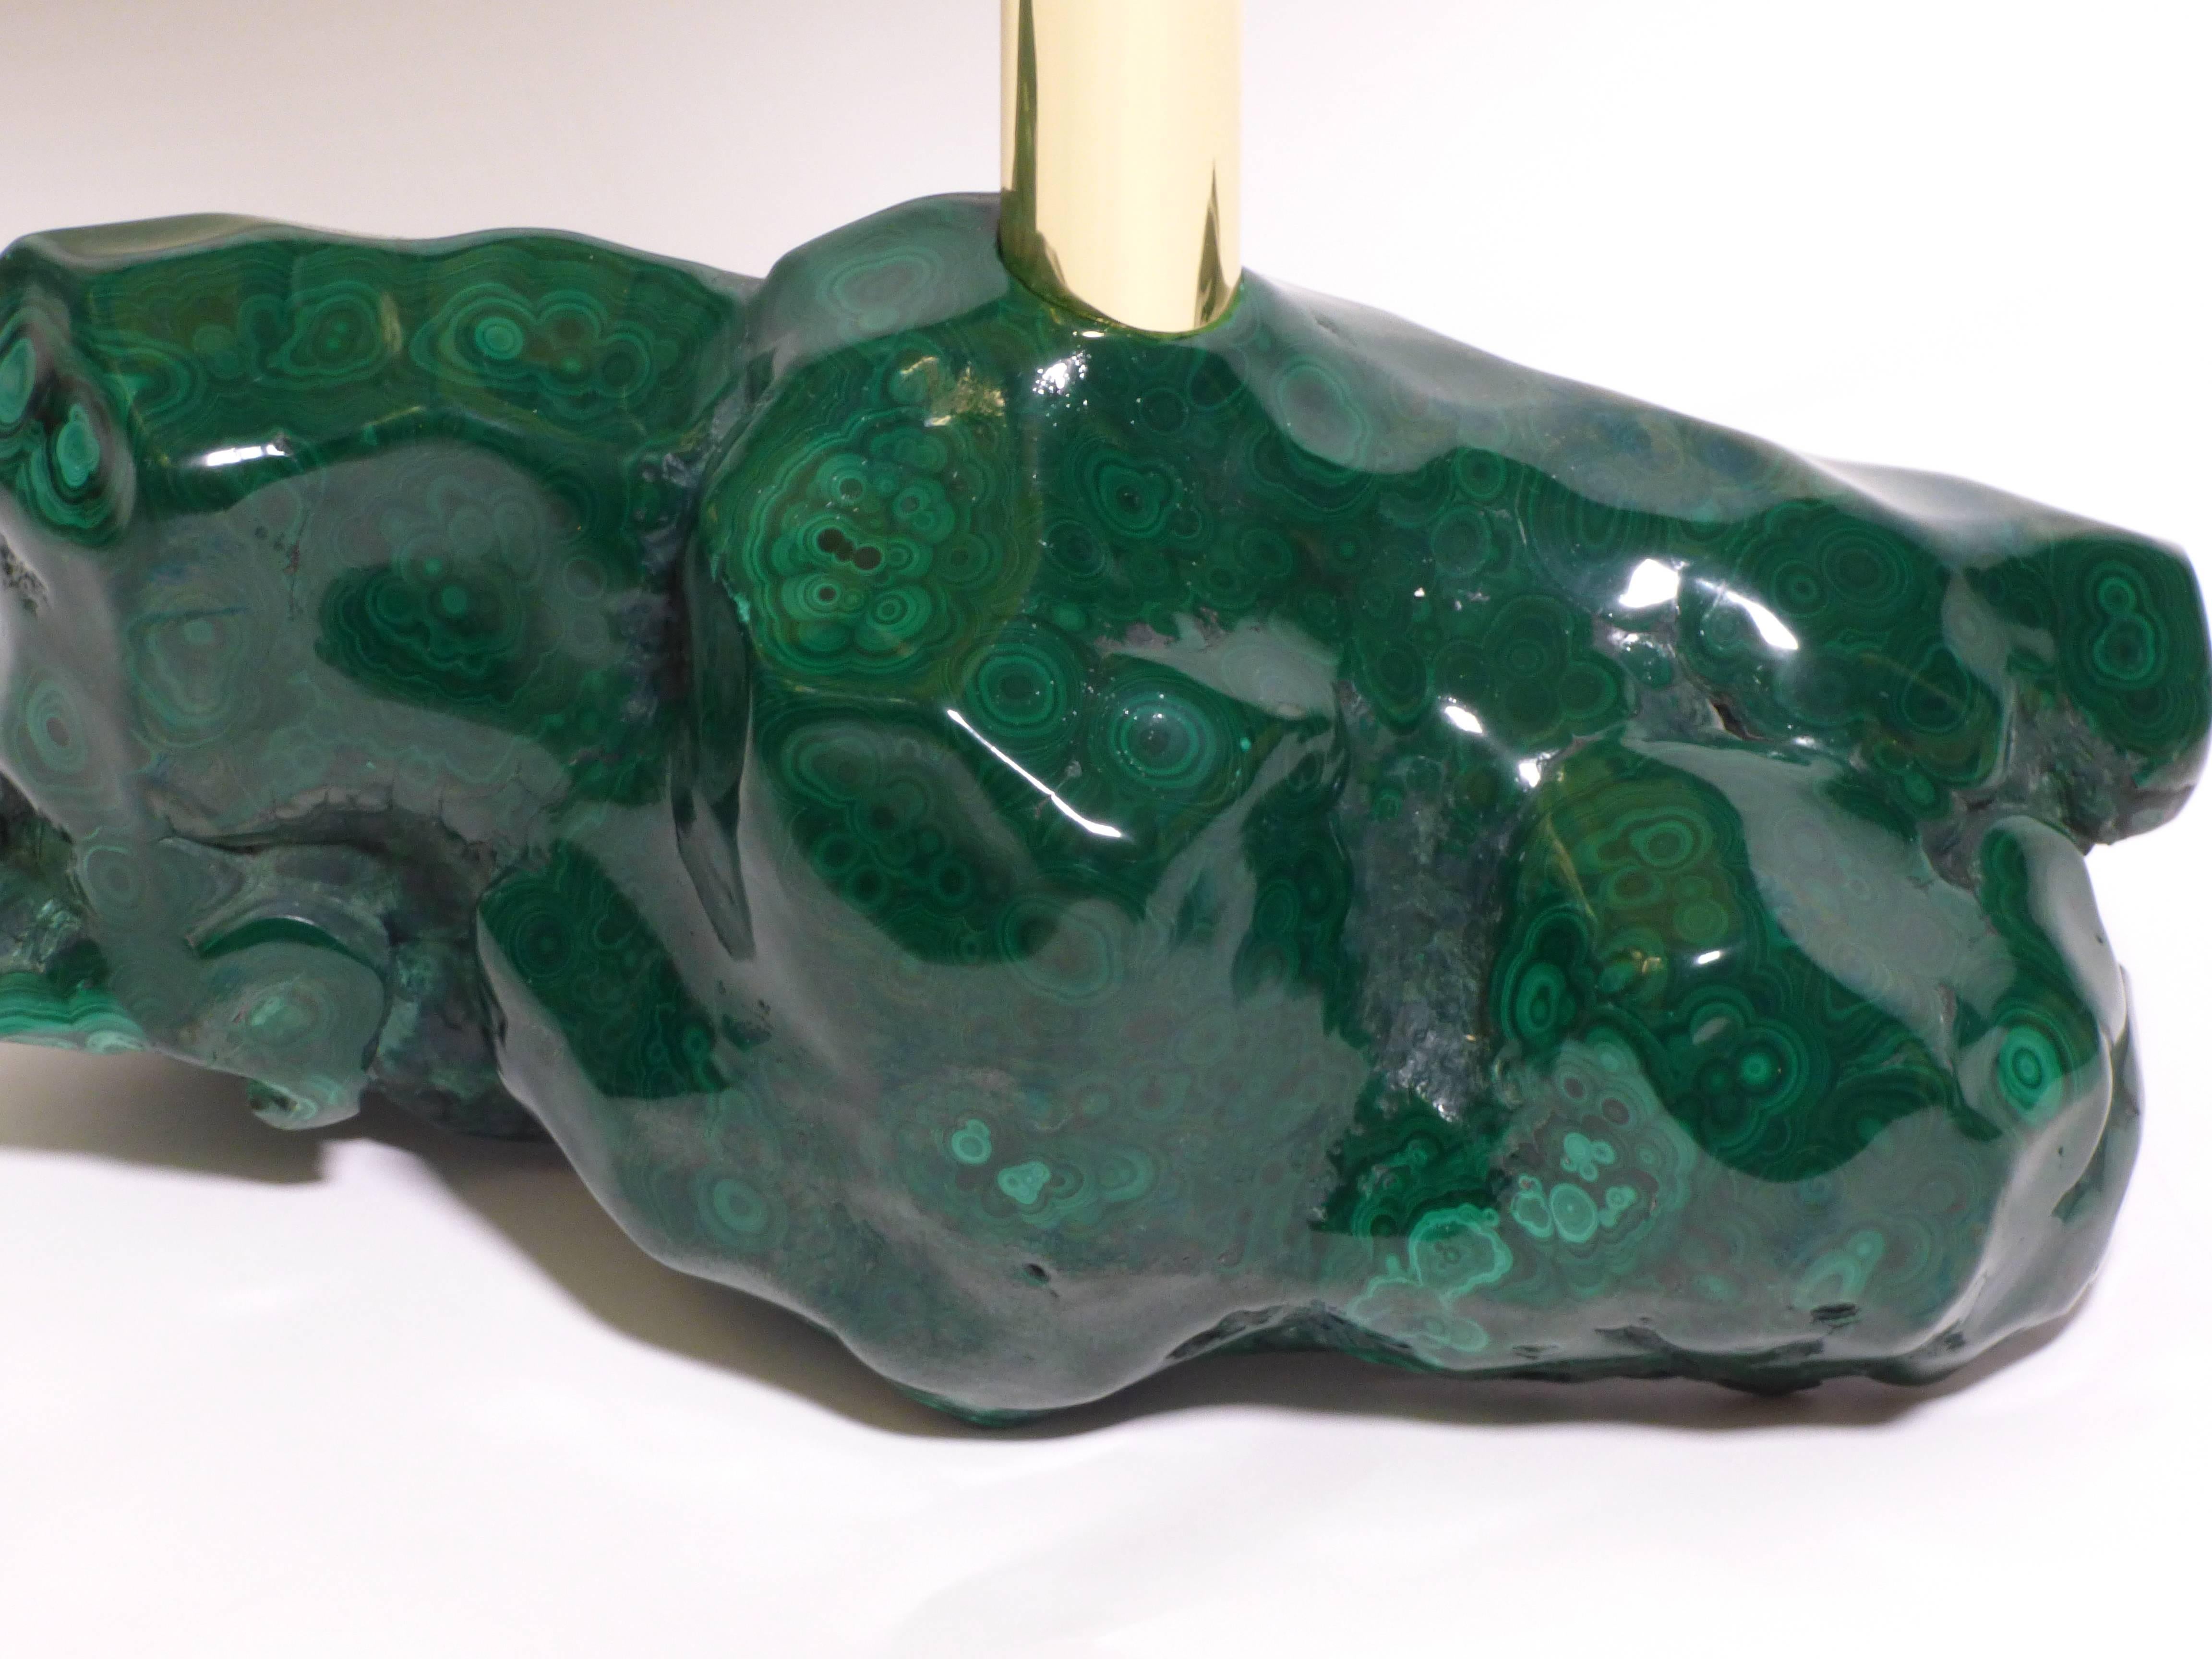 Stone Age gueridon with brass structure and base in semi-precious stone Malachite designed by Studio Superego for Superego Editions.

Biography
Superego editions was born in 2006, performing a constant activity of research in decorative arts by